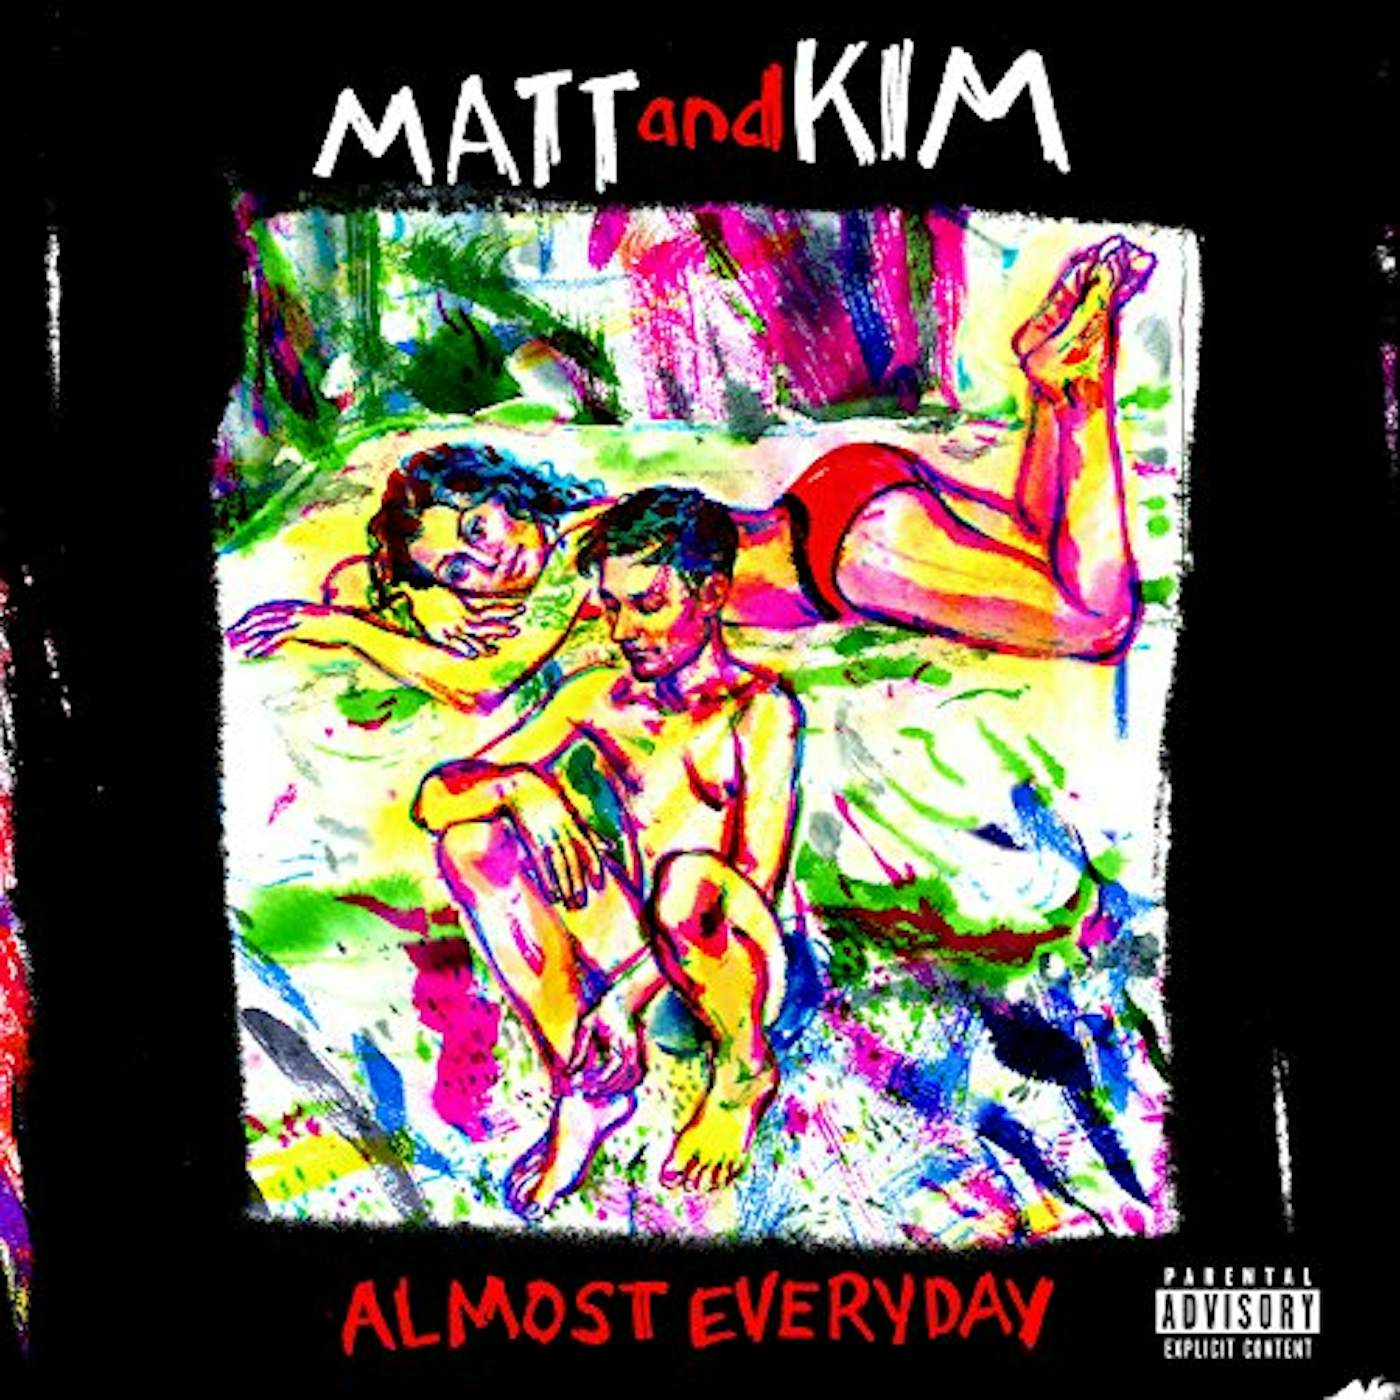 Matt and Kim ALMOST EVERYDAY - Limited Edition Red Colored Vinyl Record